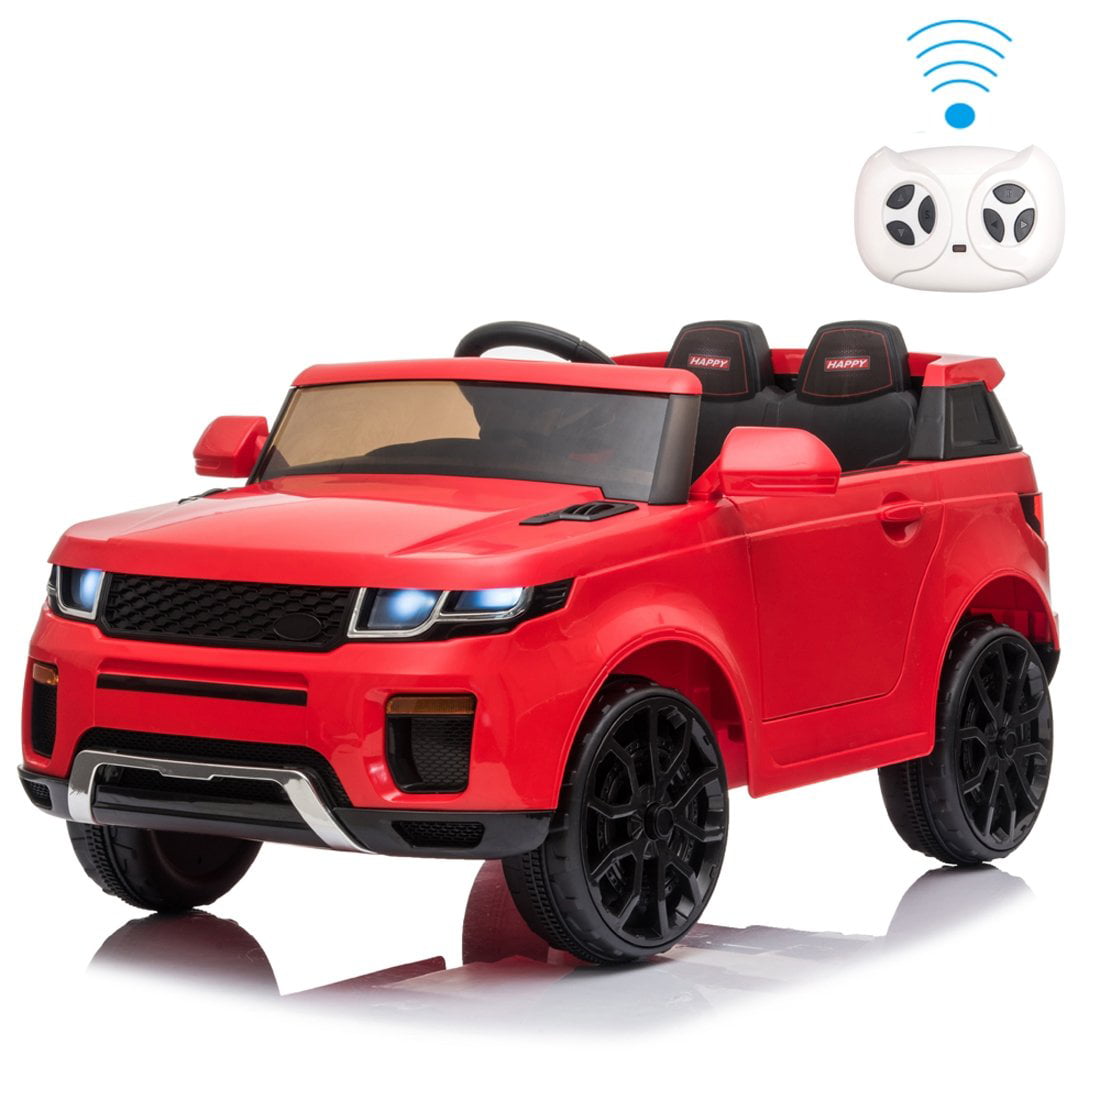 Details about   12V Kids Ride On Truck w/ 2.4GHZ Remote Control Battery Powered Ride on Toy Car 